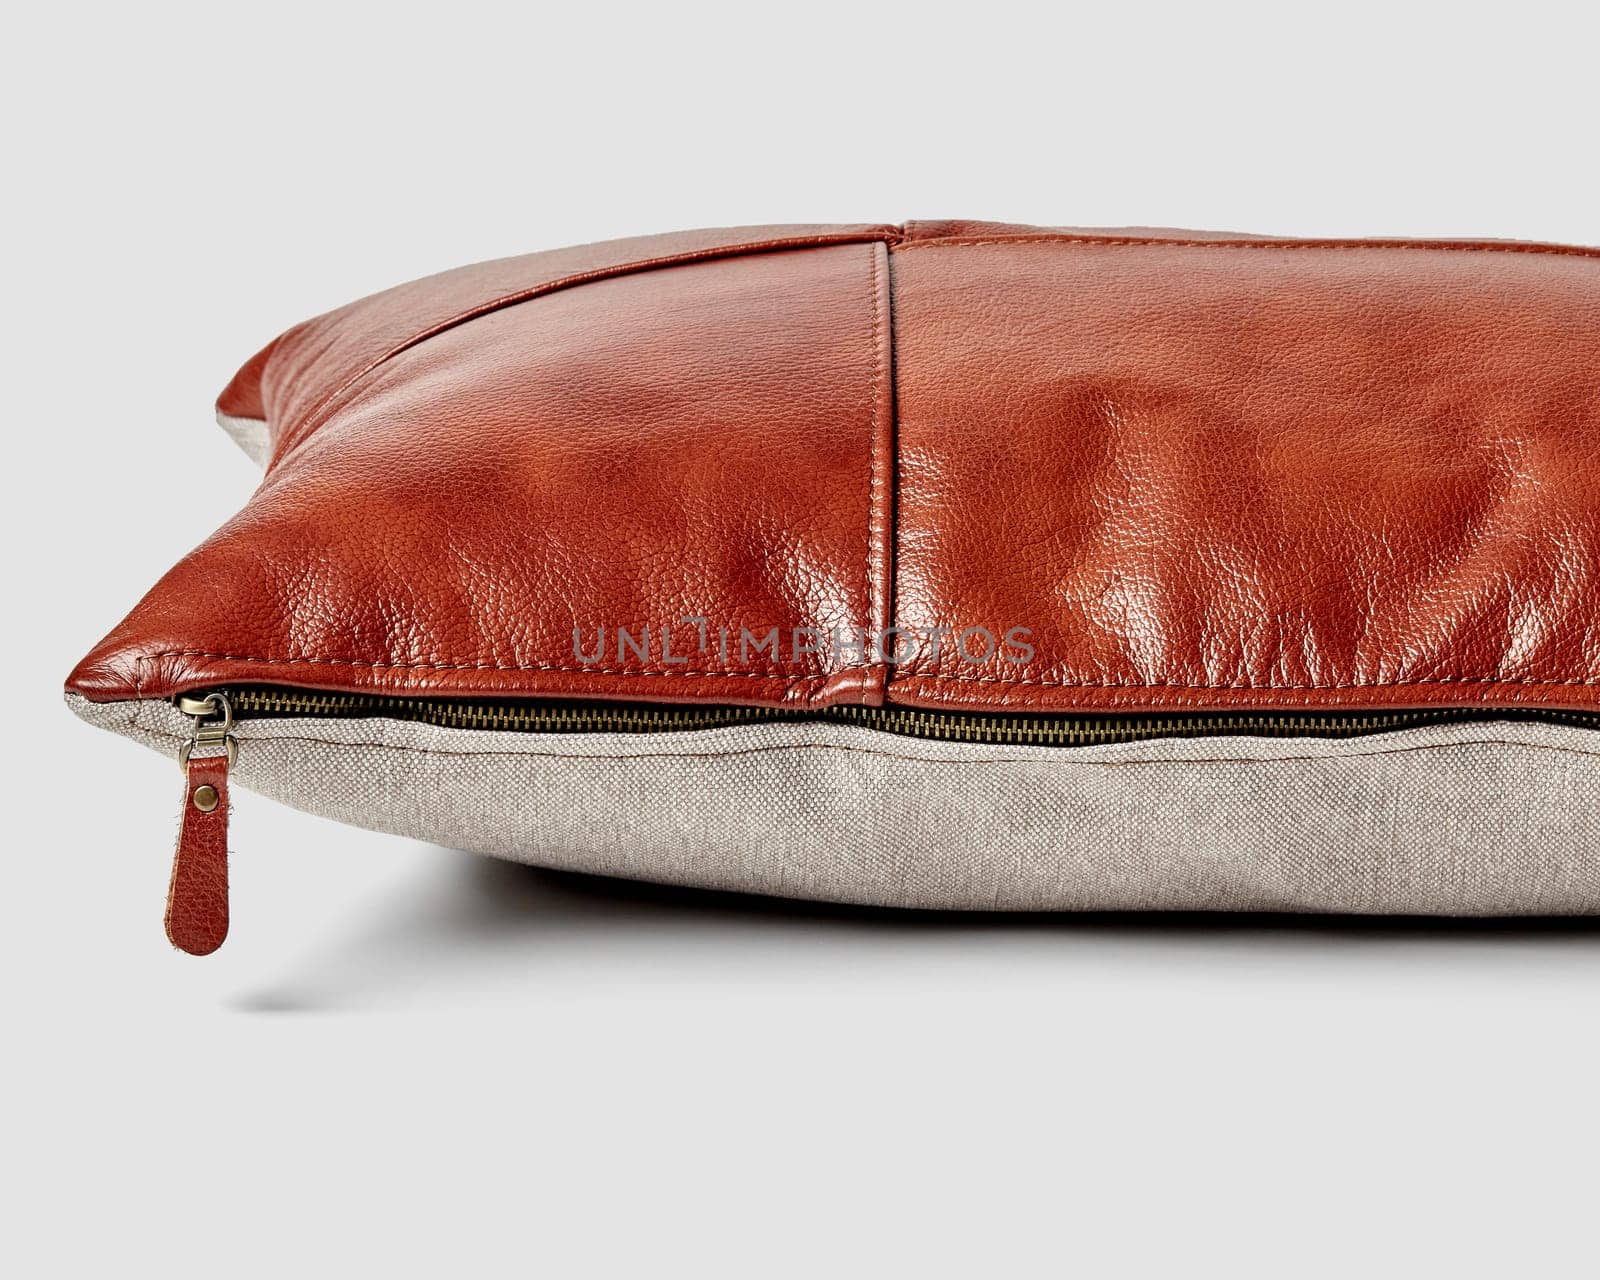 Stylish sofa pillow with hand-stitched brown leather squares on front, grey linen back and side zipper on white background. Concept of comfort and quality of handcrafted product